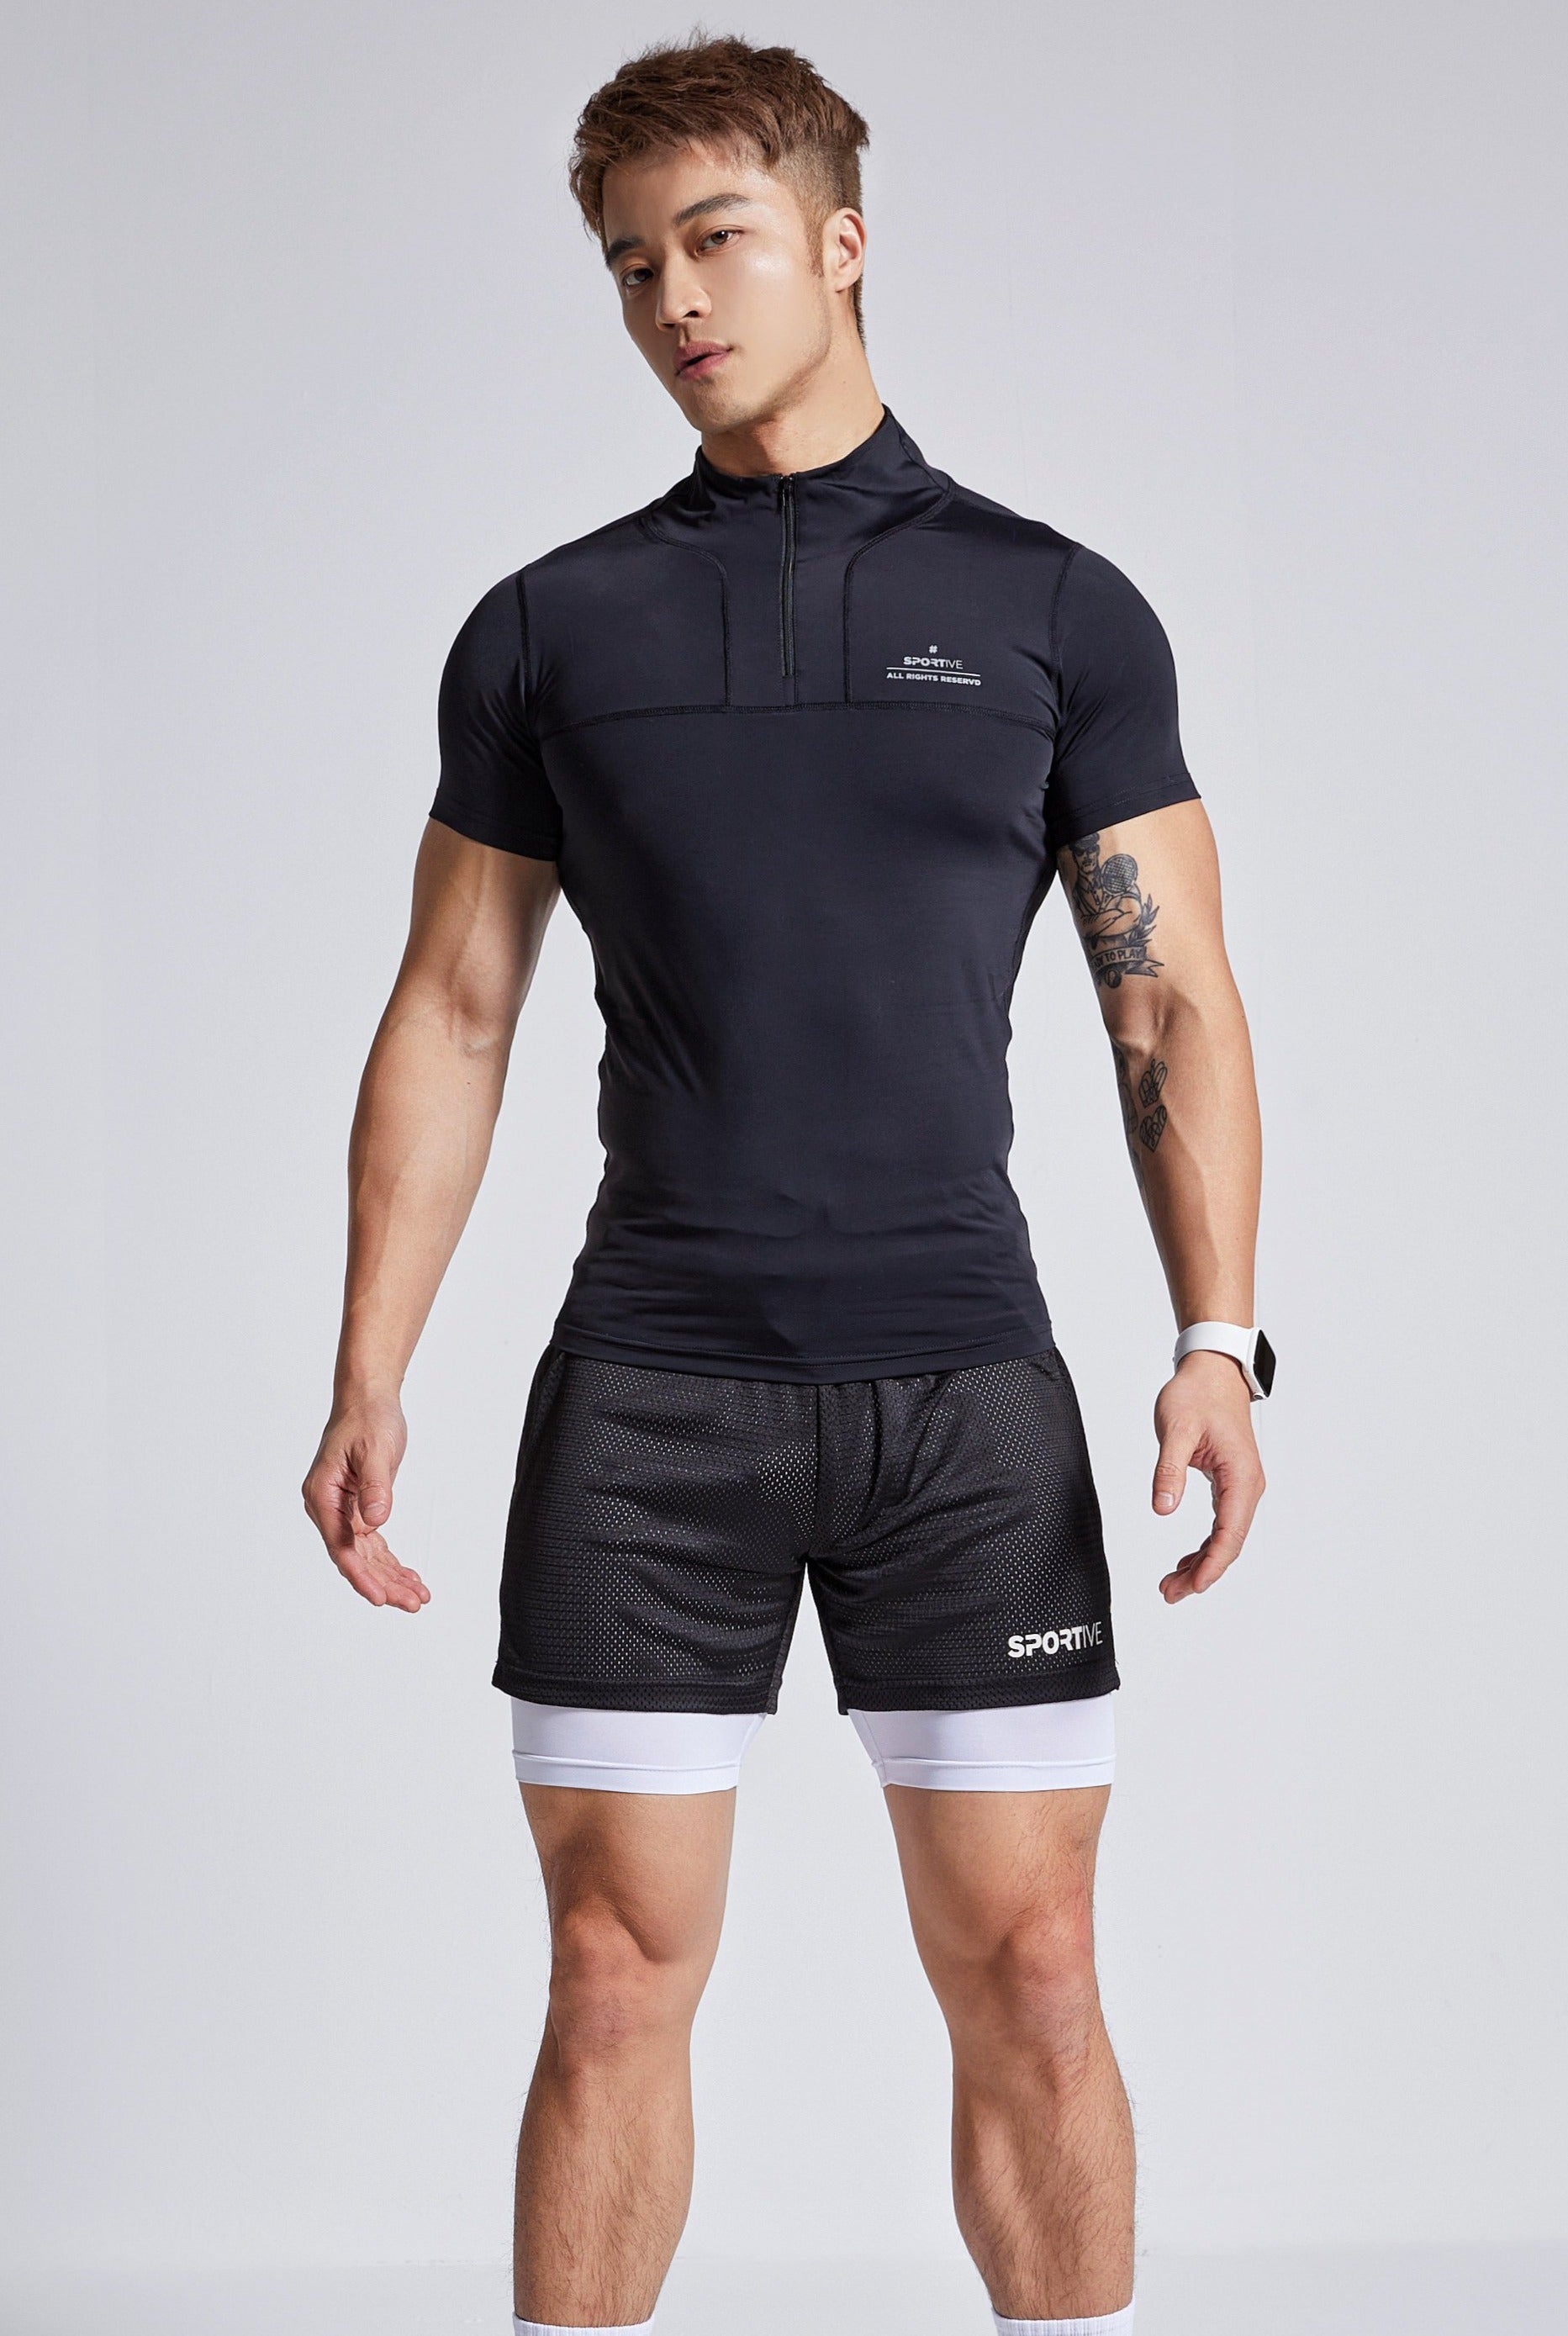 OMG® Refined Gym Class Shorts